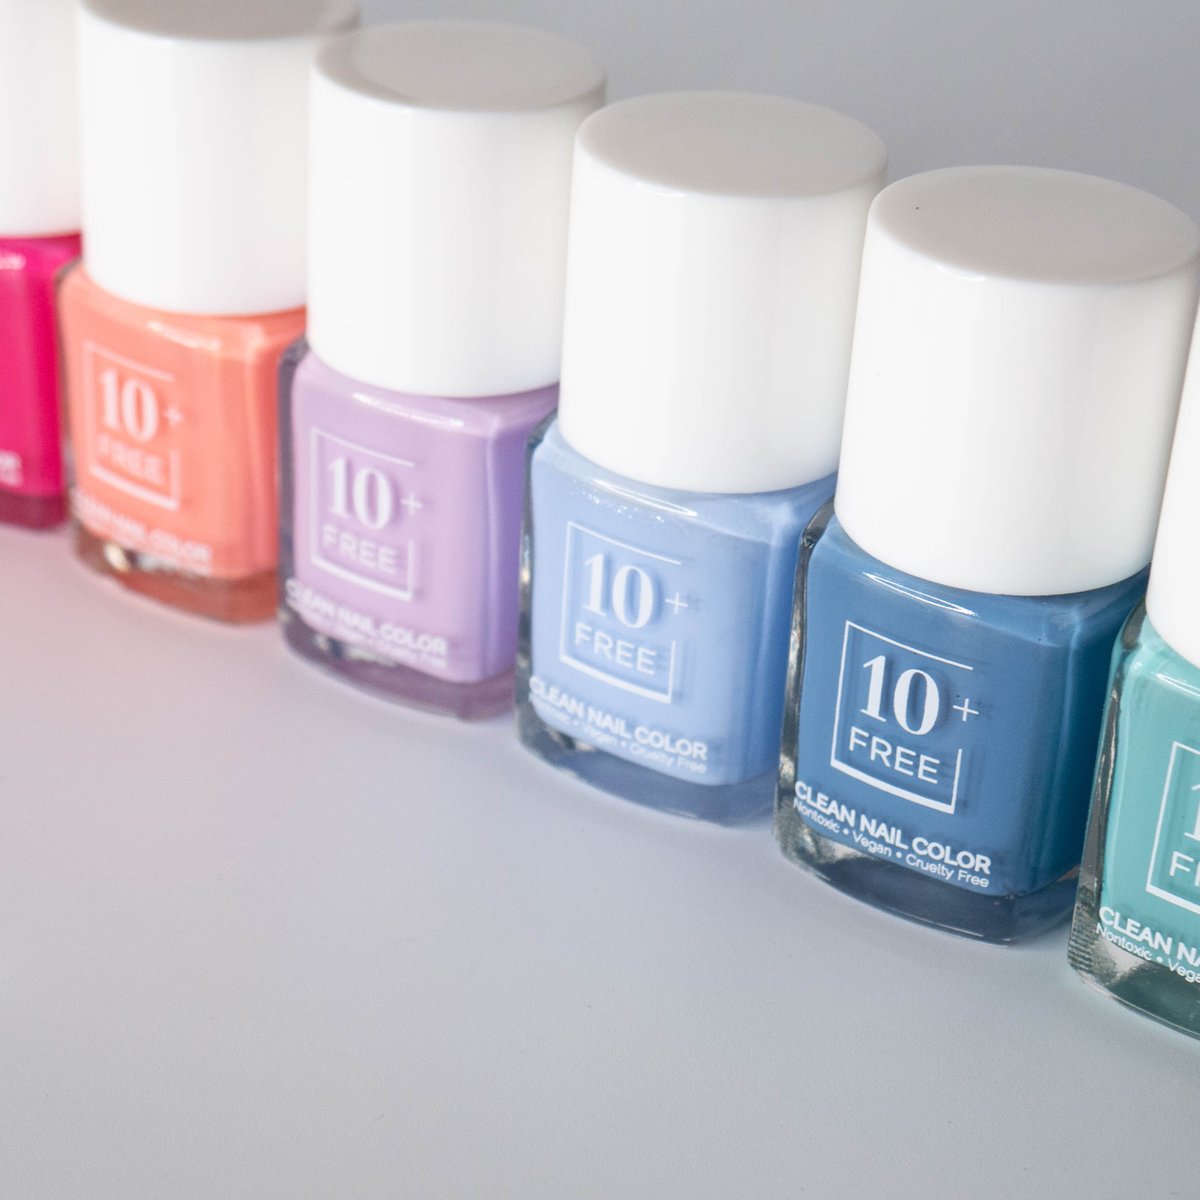 Spring is here and we have just the colors to celebrate!🌷 🐇 ☀️ 
.
.
.
#10FreeNails #10Free #nails #cleannails #vegan #crueltyfree #nontoxic #cleanbeauty #veganbeauty #nailsoftheday #nailcolor #nailartvideos #graynails #edgynails #weddingnails #springishere #springcolors